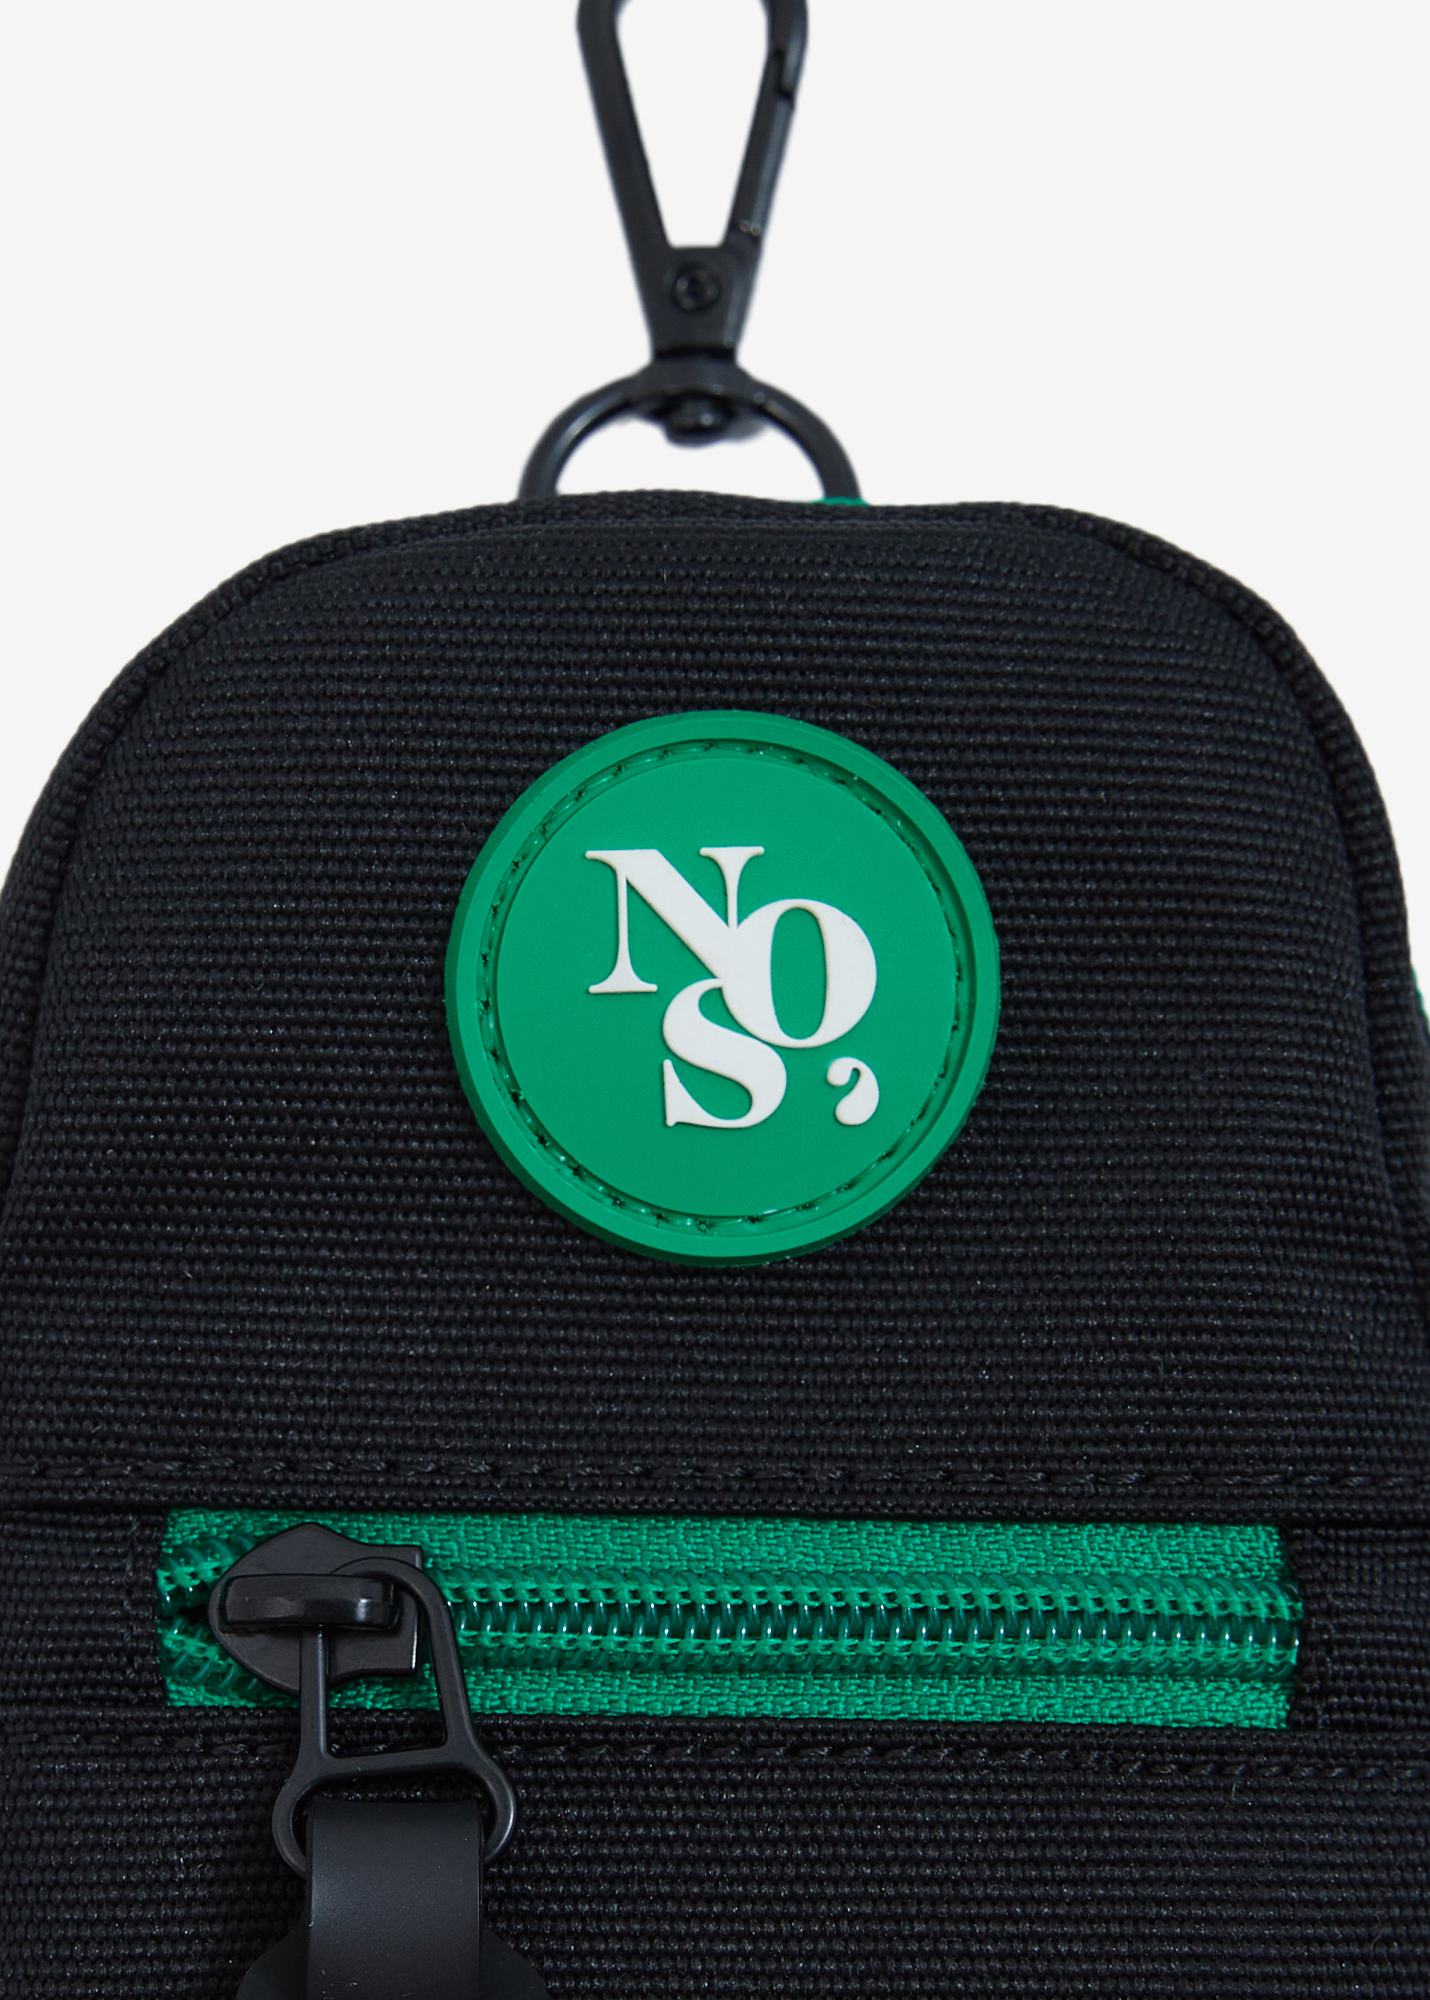 NOS7 Key ring pouch bag - Green